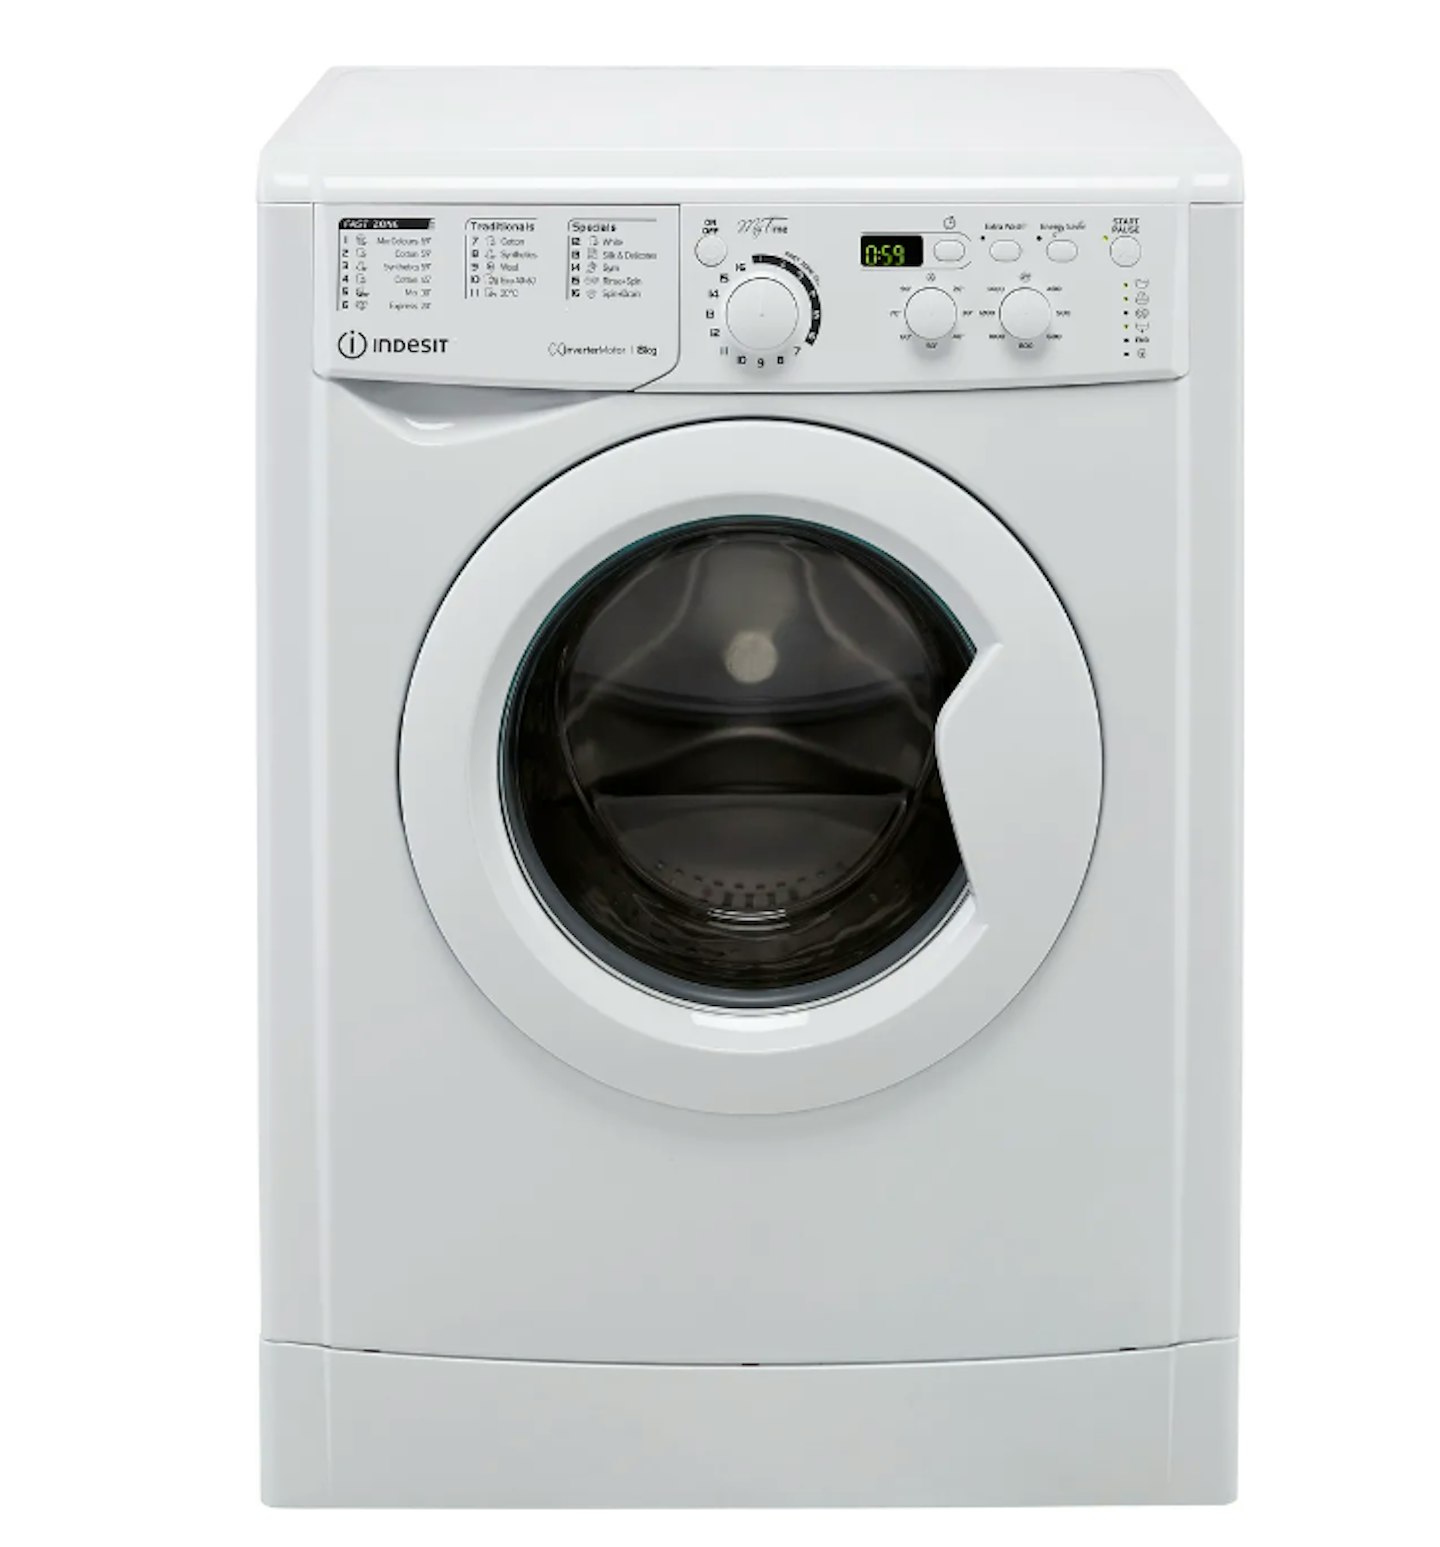 Indesit My Time EWD81483WUKN 8kg Washing Machine with 1400 rpm - White - D Rated